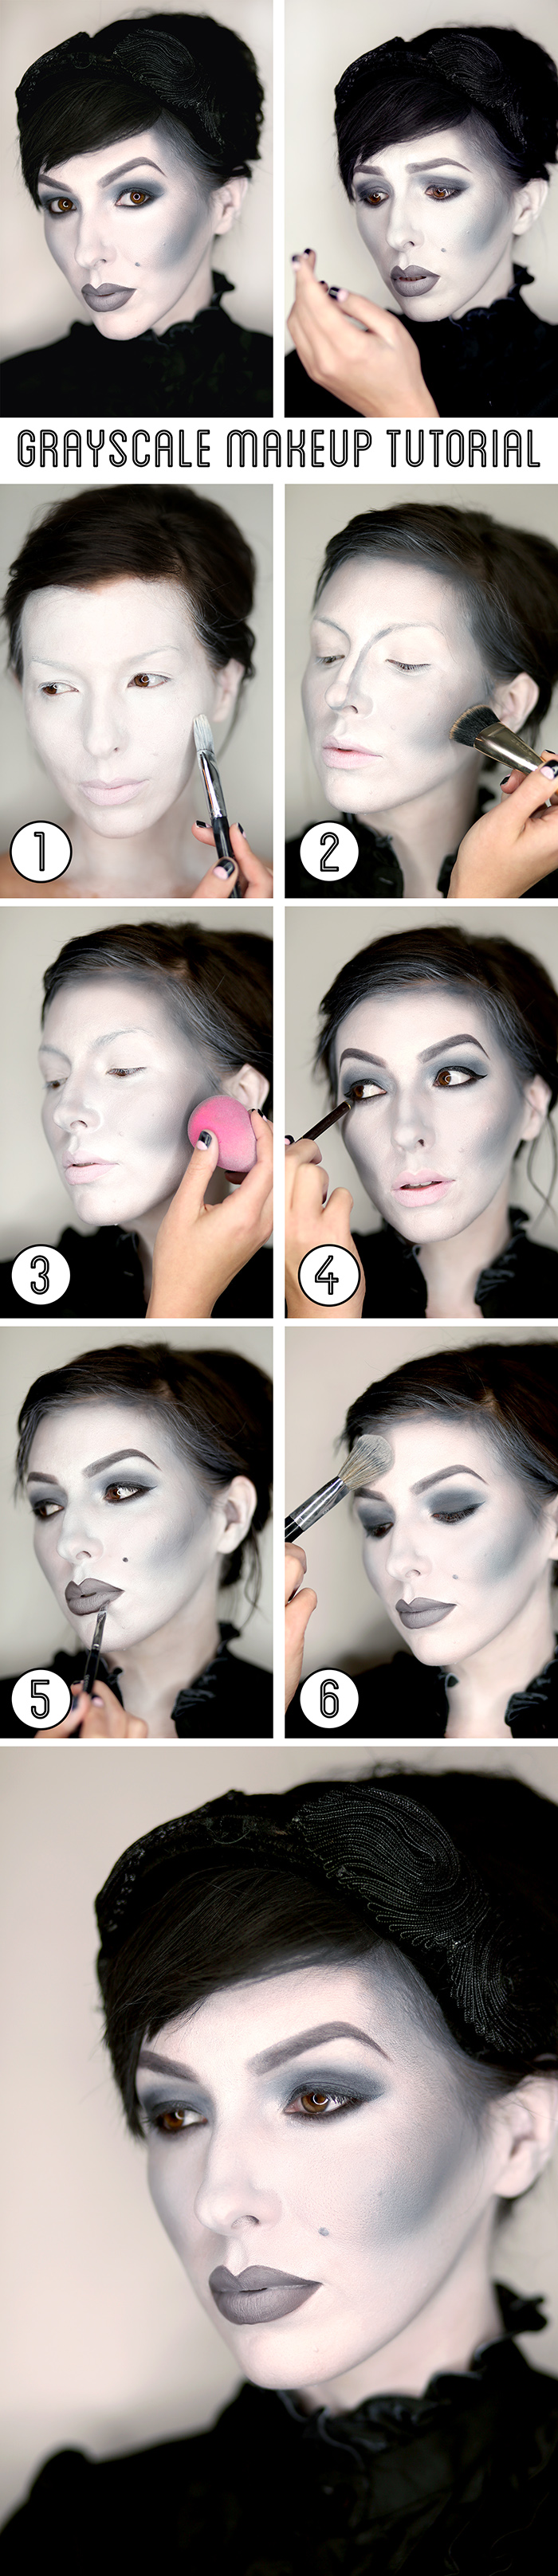 halloween black and white grayscale makeup tutorial